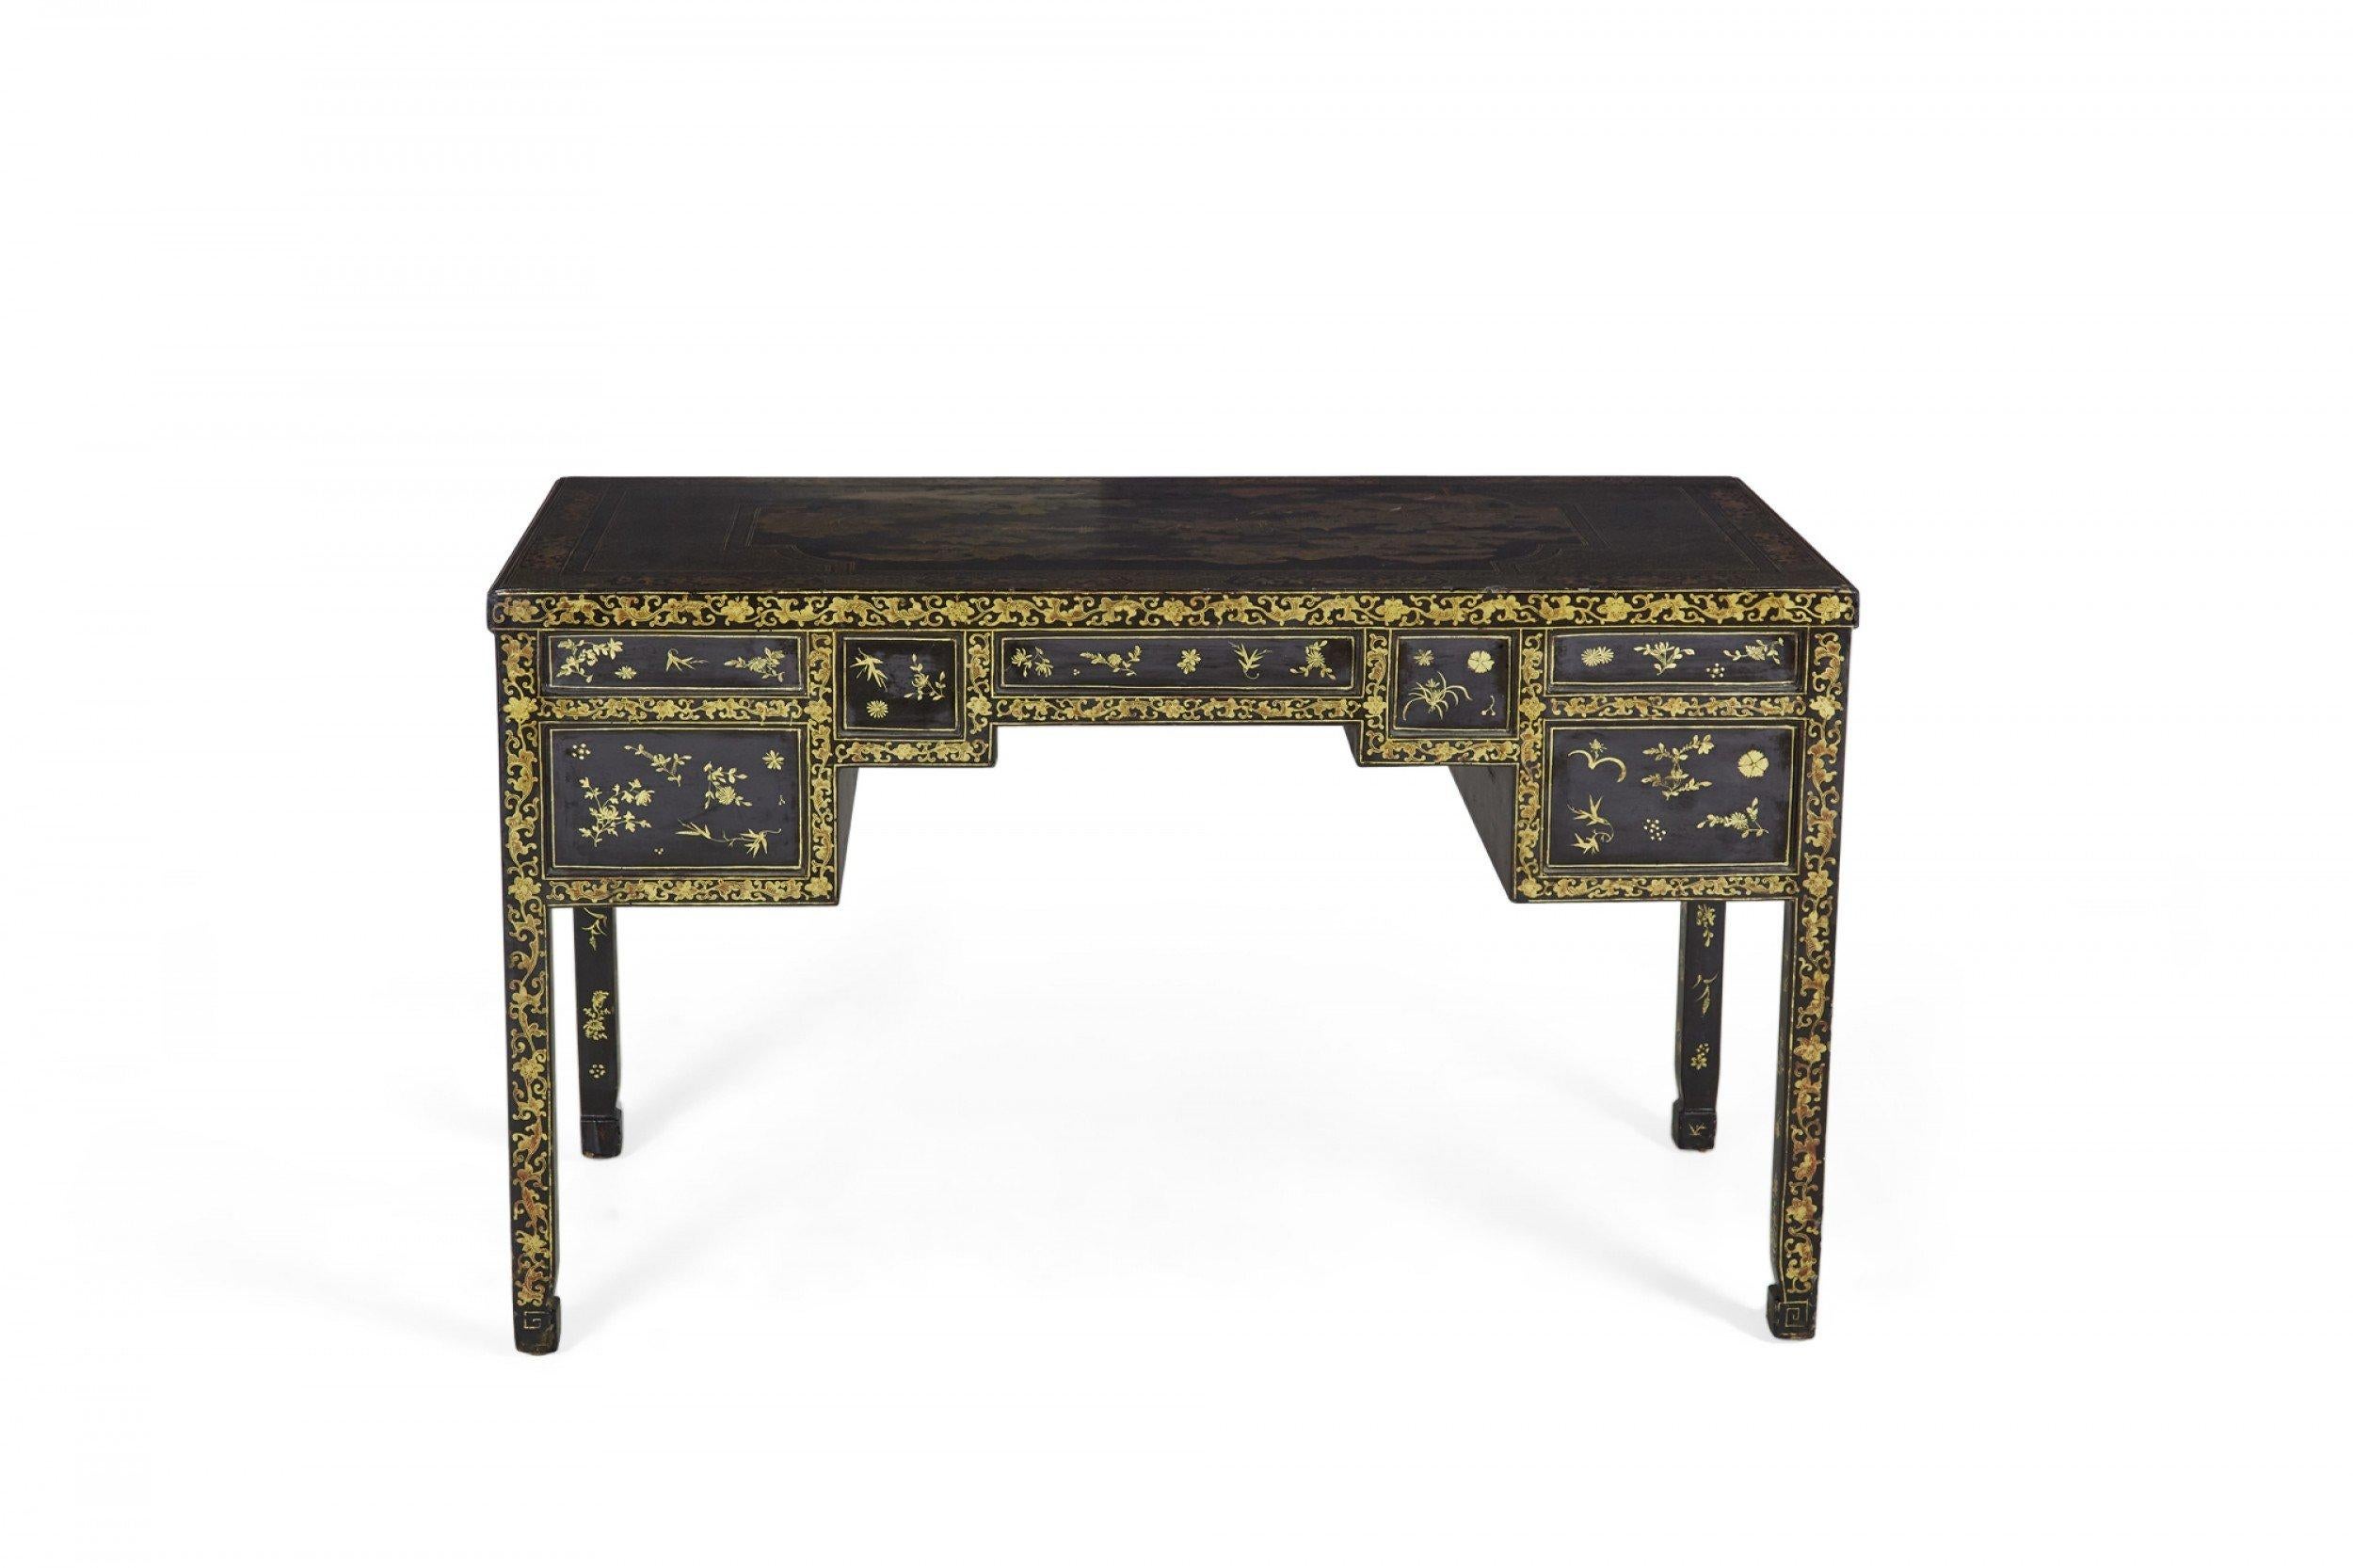 19th Century English Regency Chinese Export Gilt Black Lacquer Desk For Sale 1